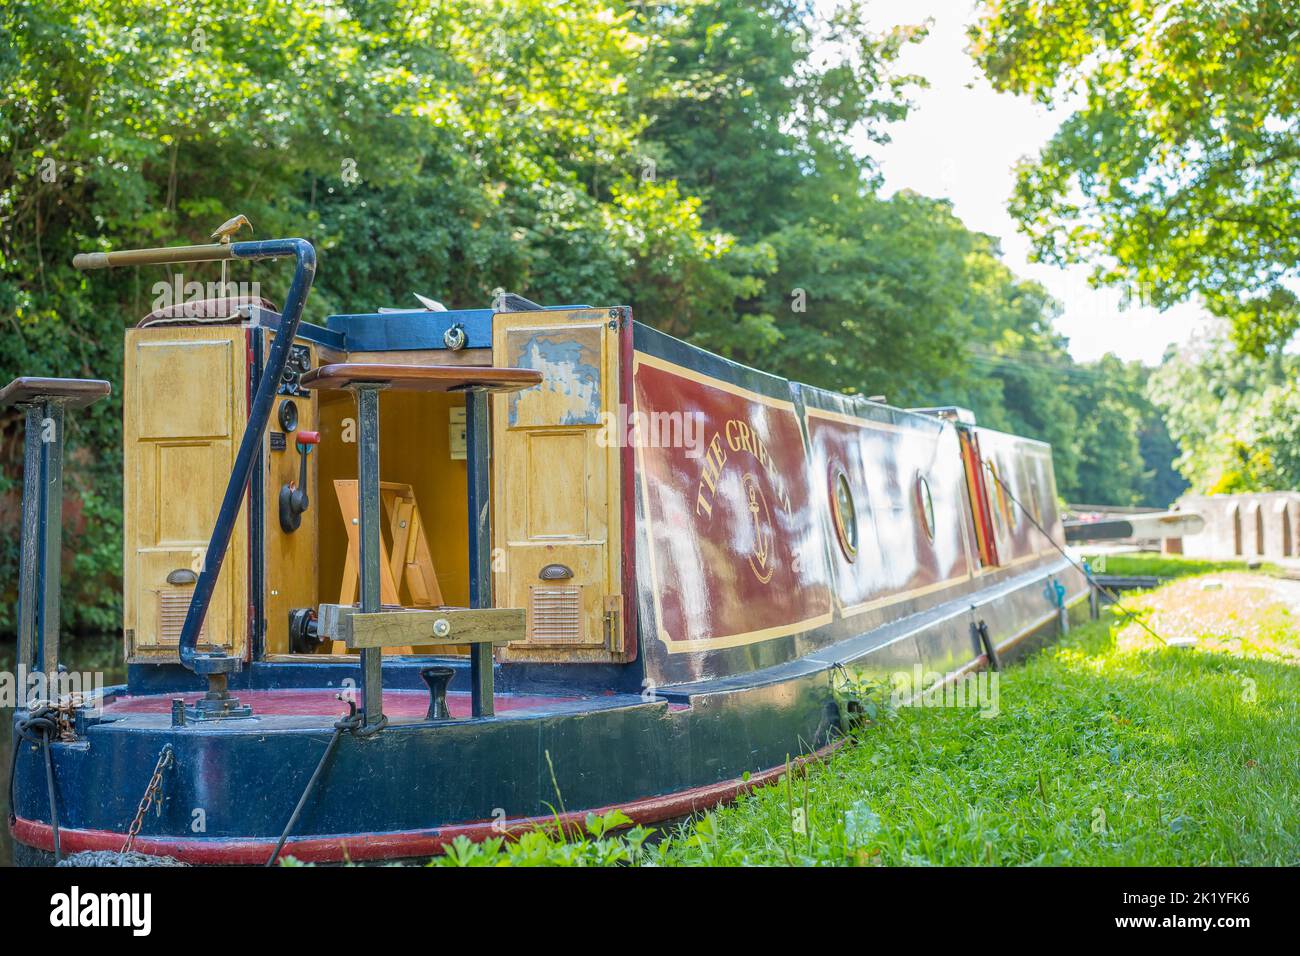 Rear view of a canal boat moored up on a canal with the rear doors open. No people, boat only. Stock Photo